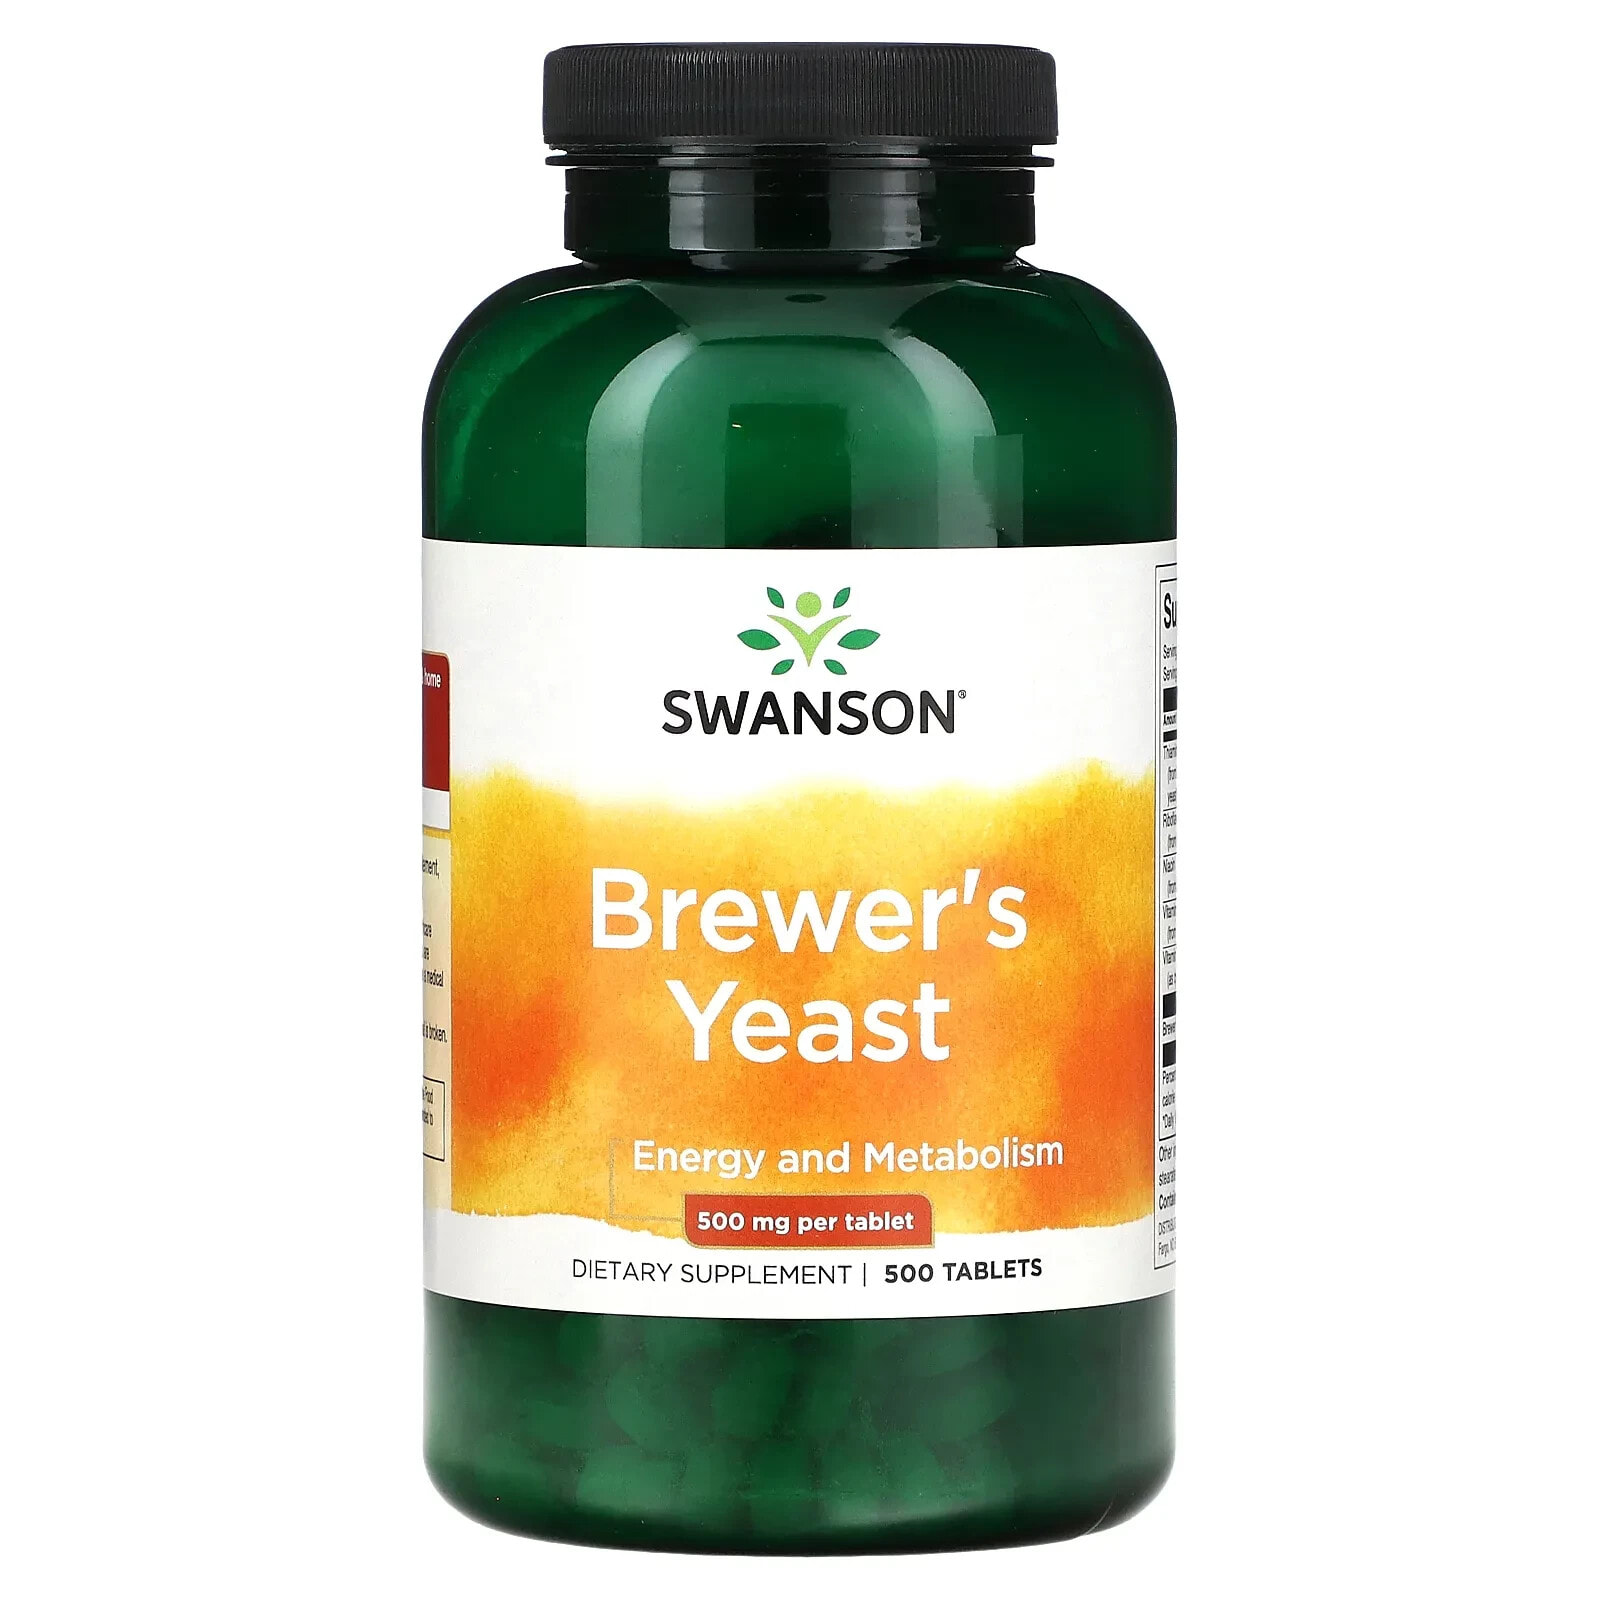 Brewer's Yeast, 500 mg, 500 Tablets (250 mg Per Tablet)